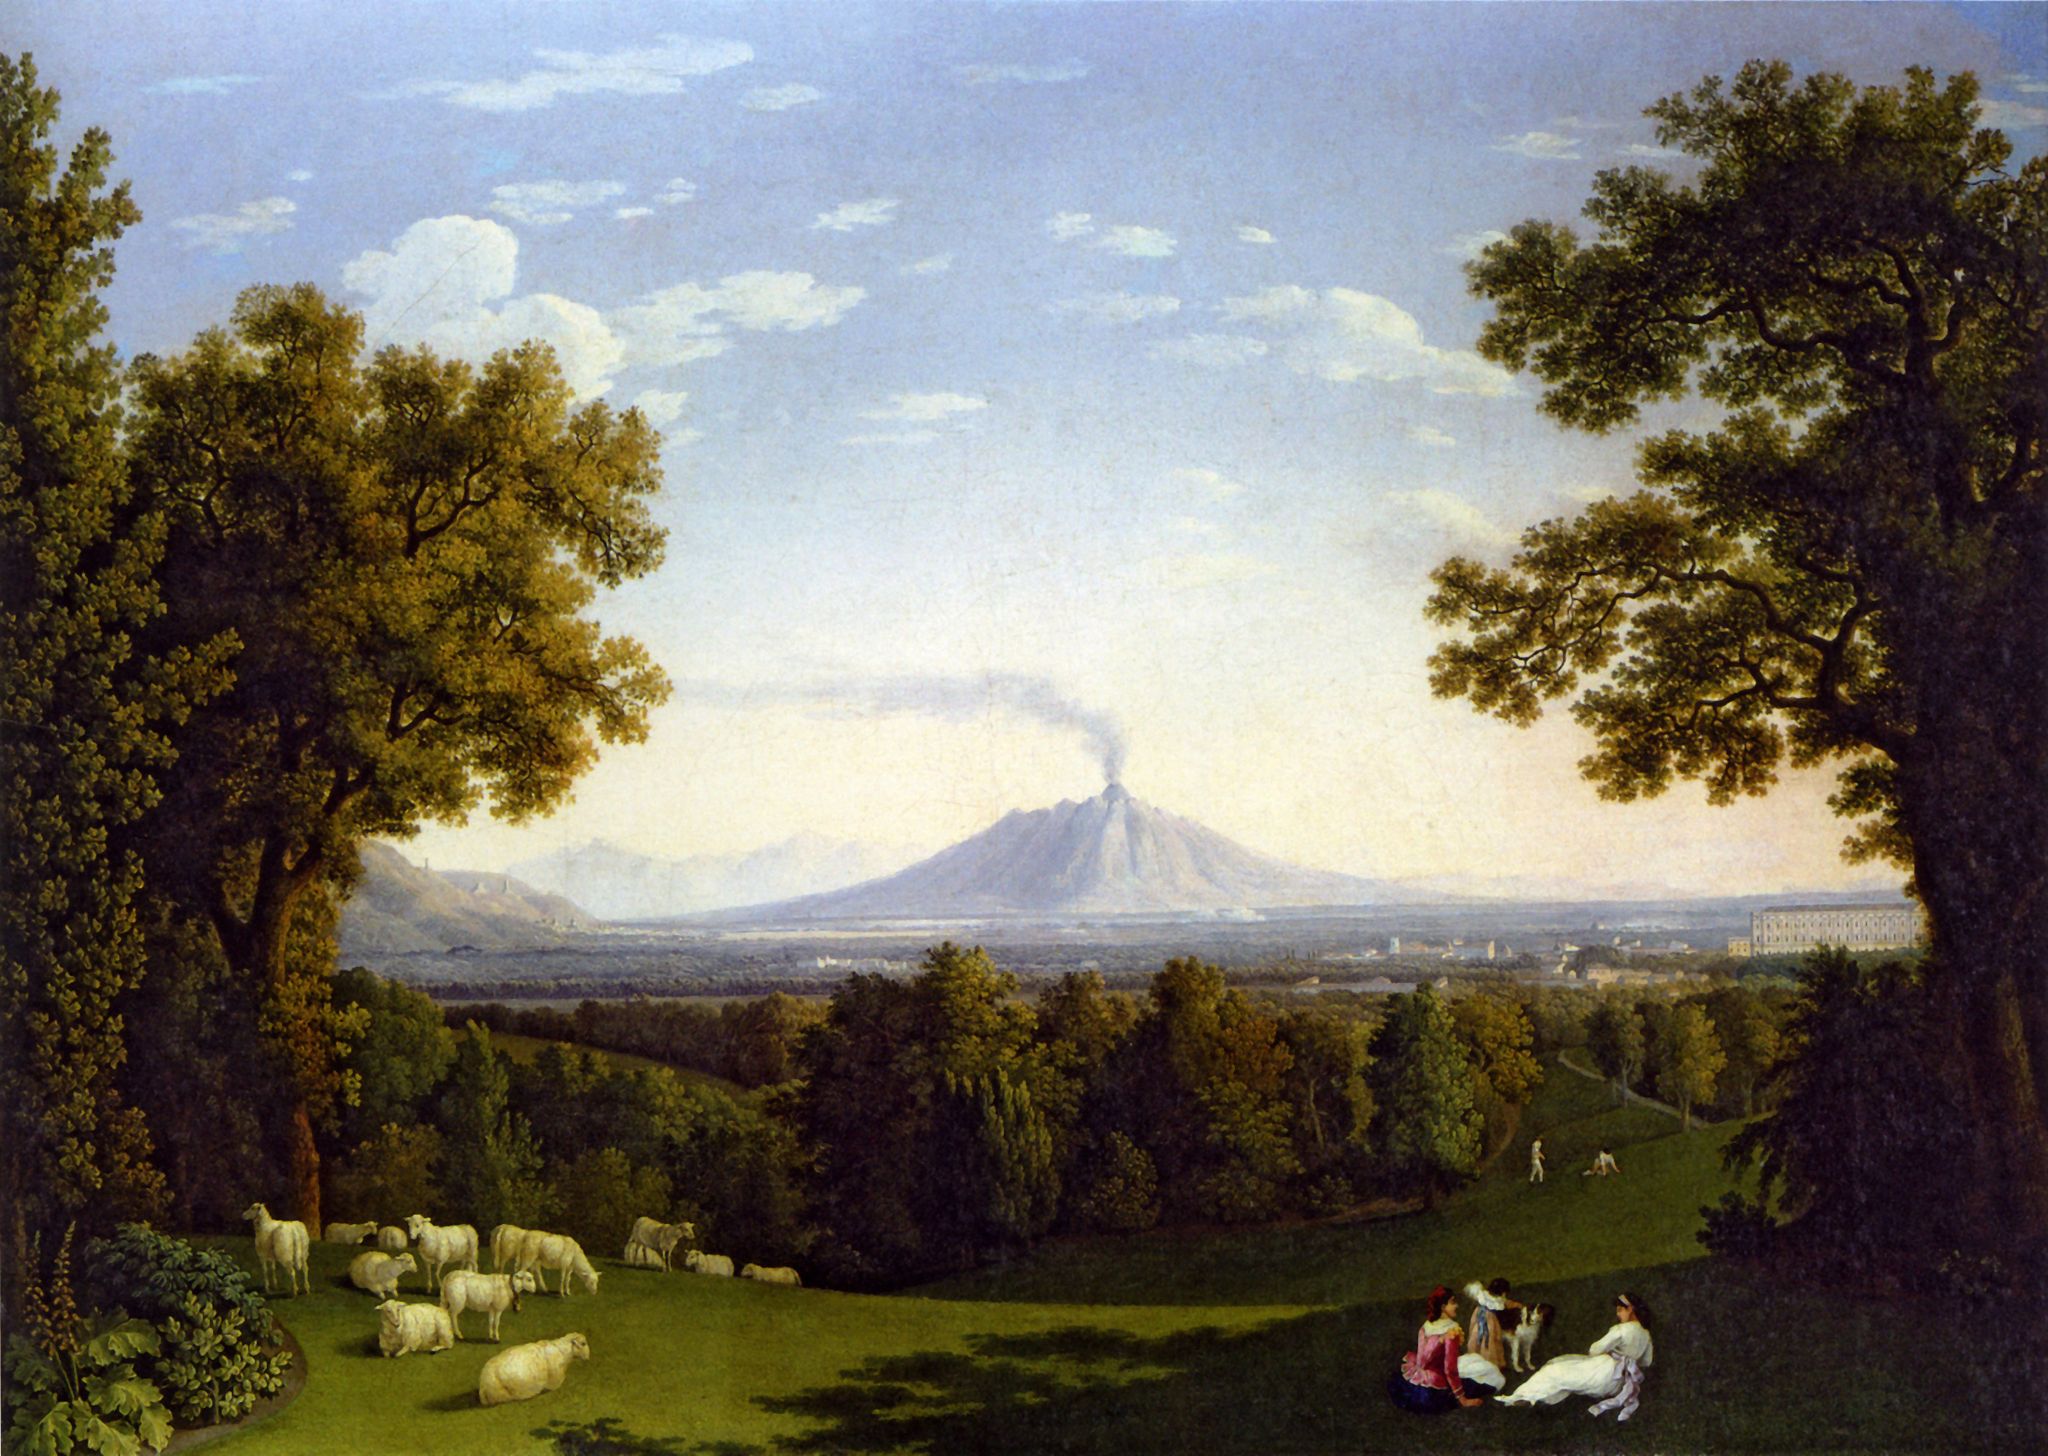 Landscape with the Palace at Caserta with the Vesuvius